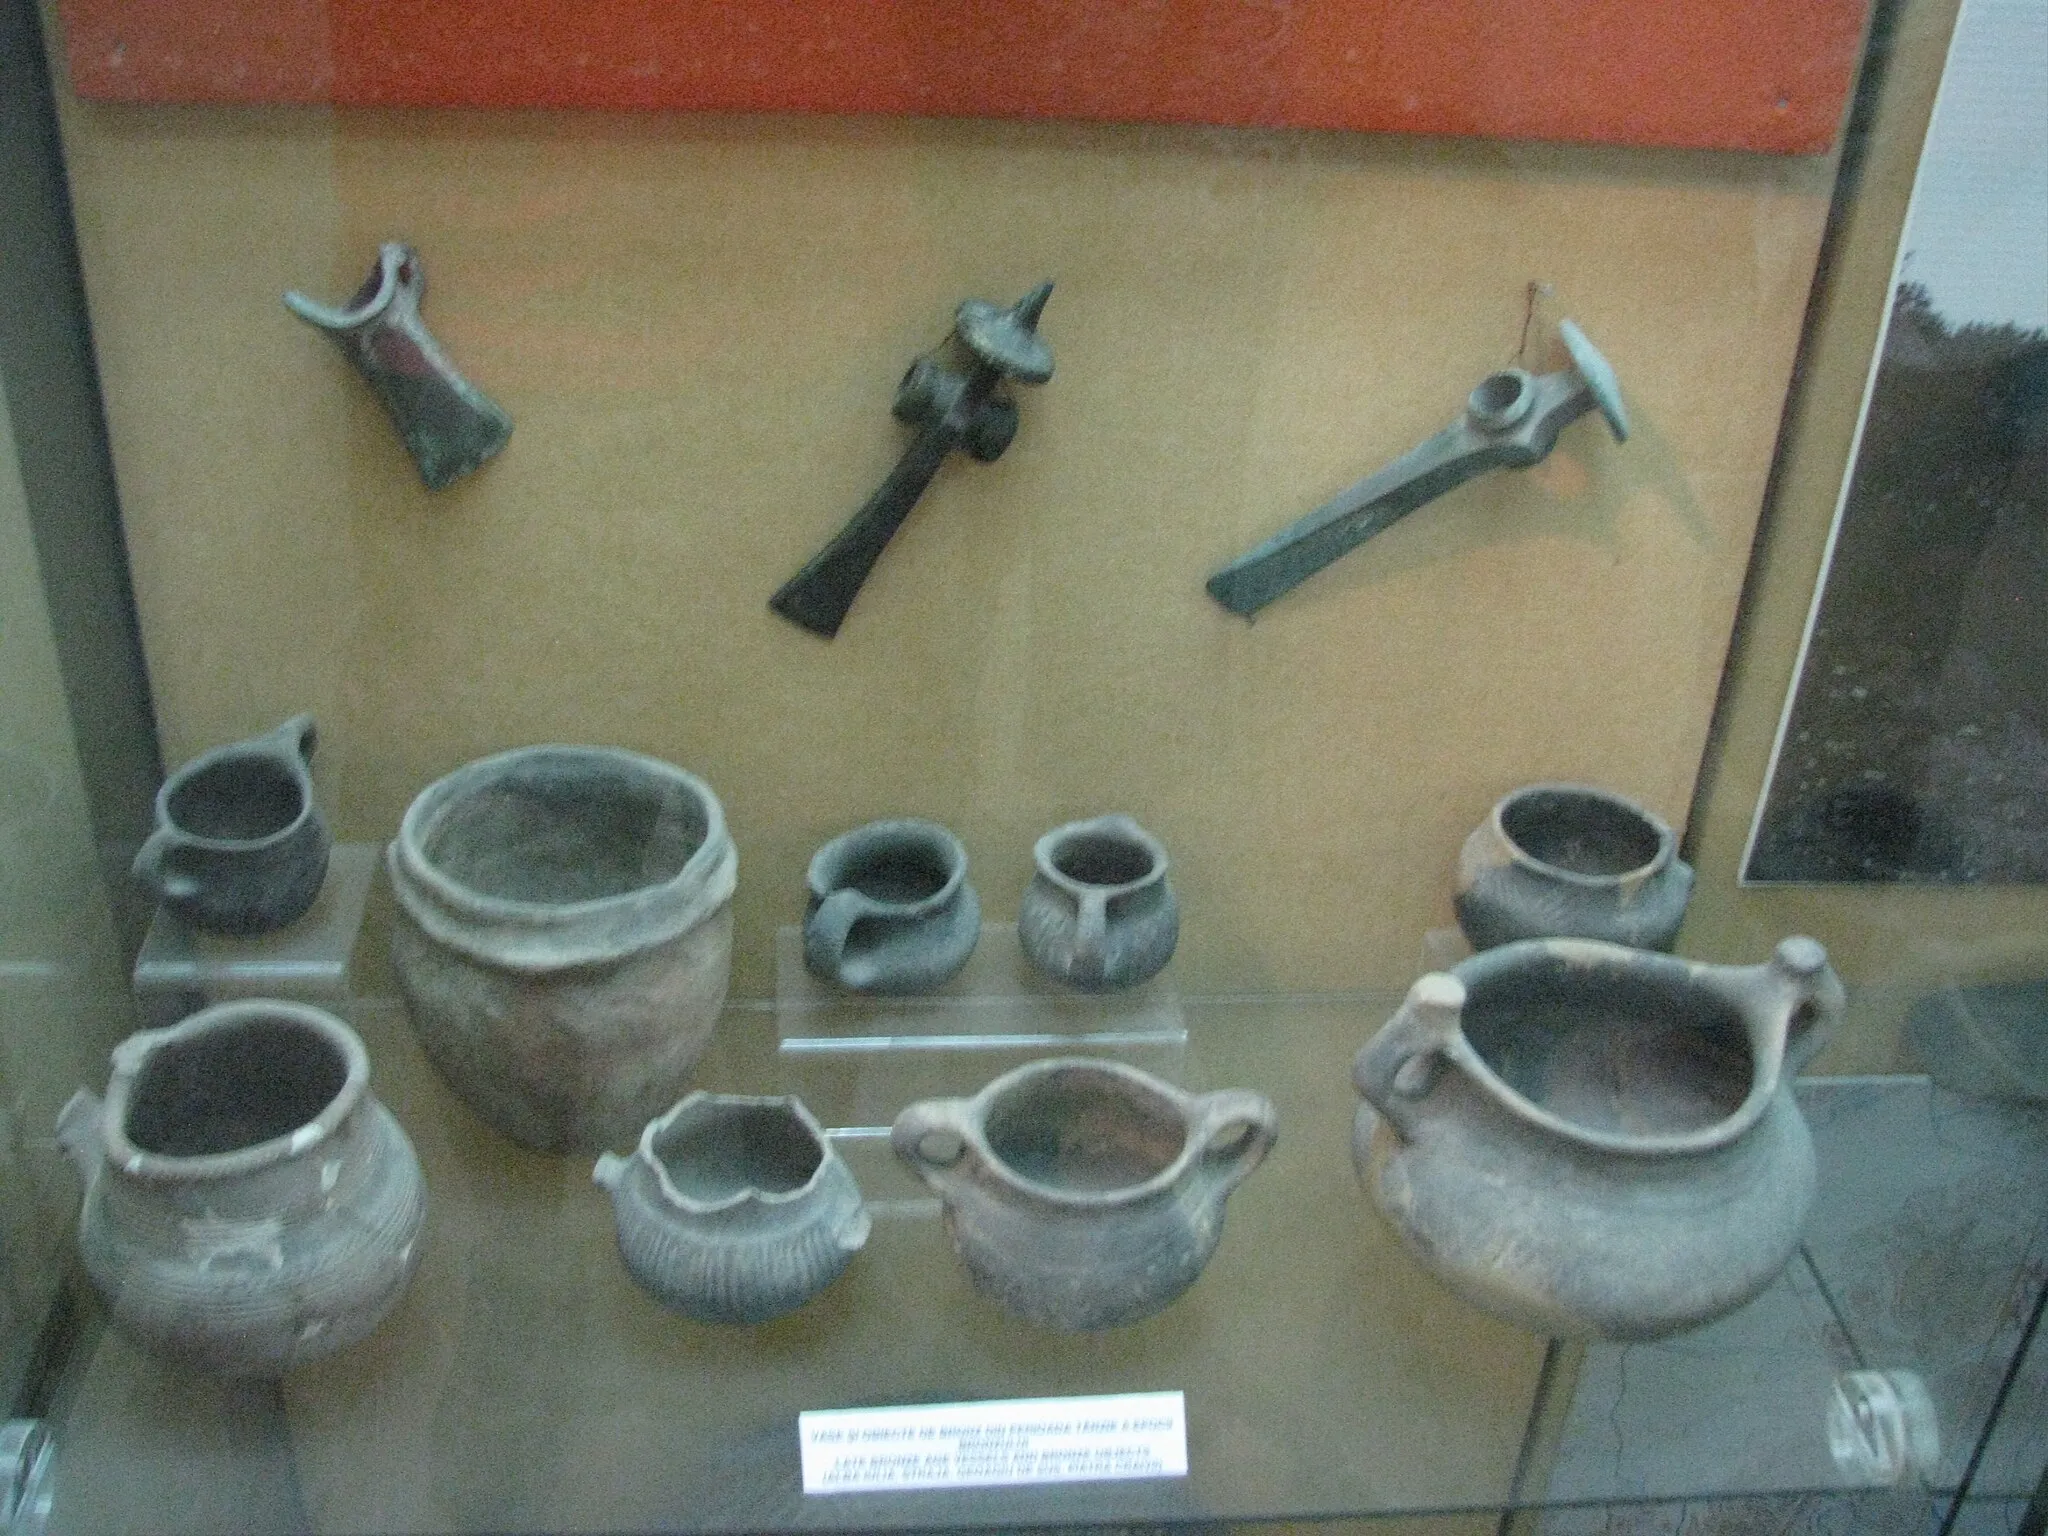 Photo showing: Alba Iulia National Museum of the Union 2011 - Late Bronze Age Vessels and Bronze Objects, from various locations: Alba Iulia, Straja, Geoagiu de Sus, Piatra Craivii

This is a photo of a historic monument in județul Alba, classified with number AB-I-s-A-00028.